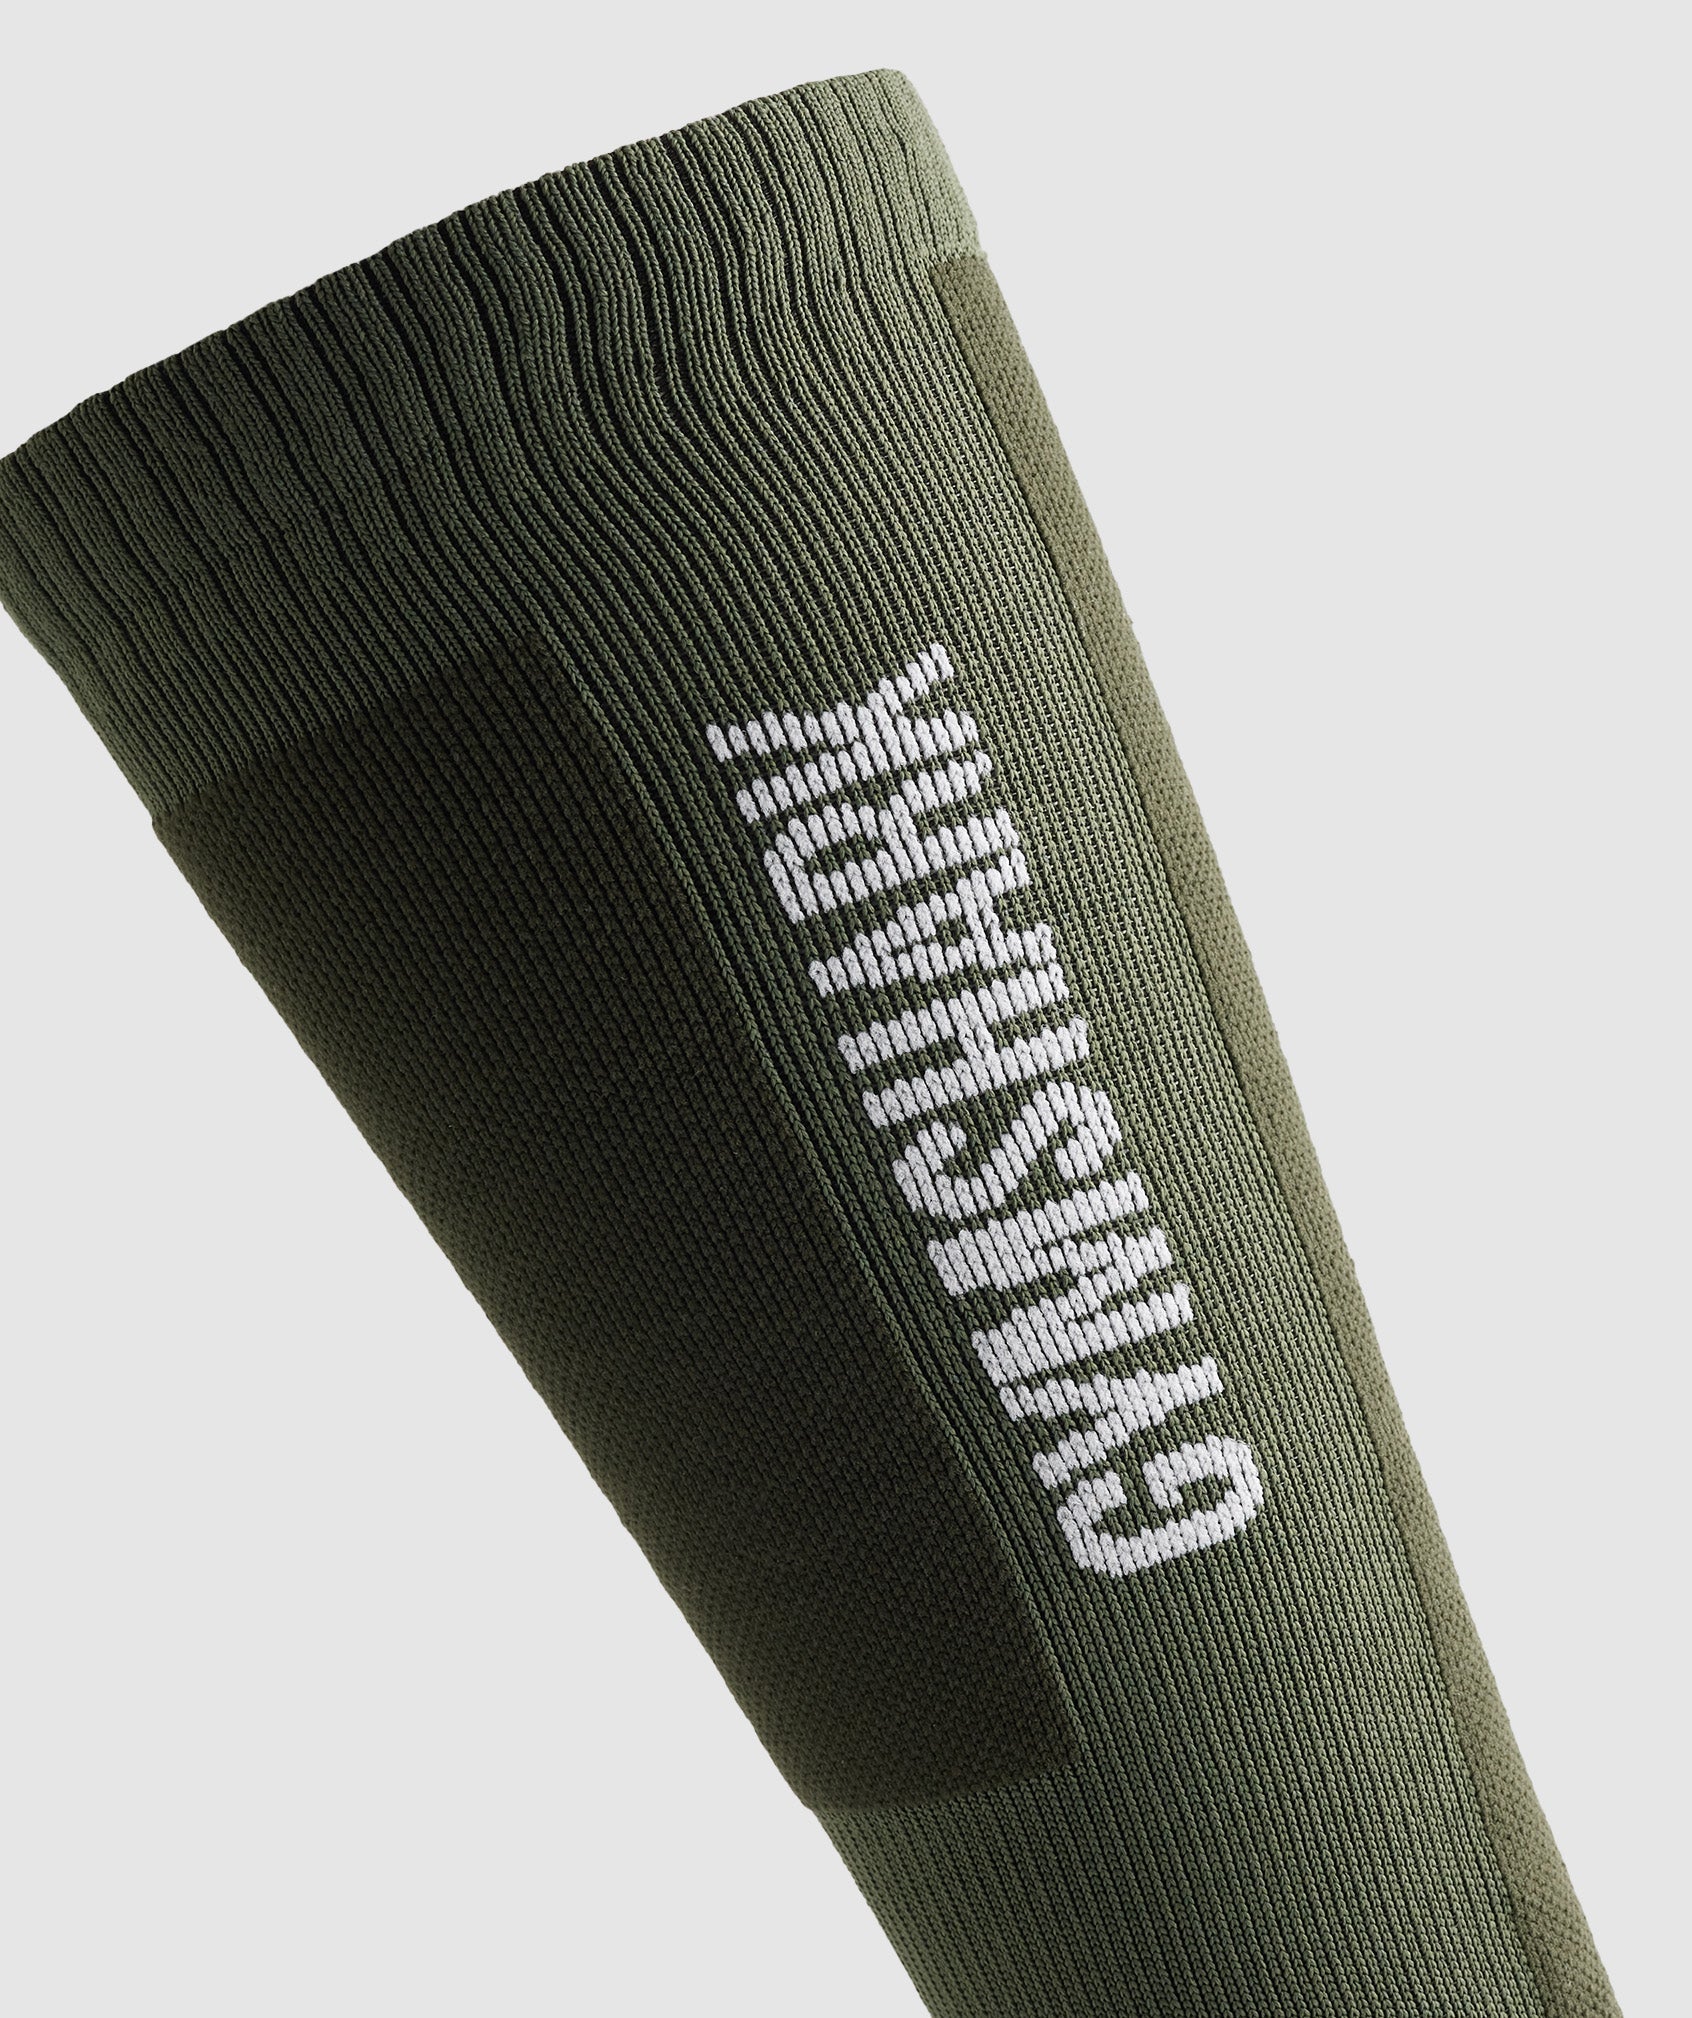 Weightlifting Sock in Olive Green - view 3